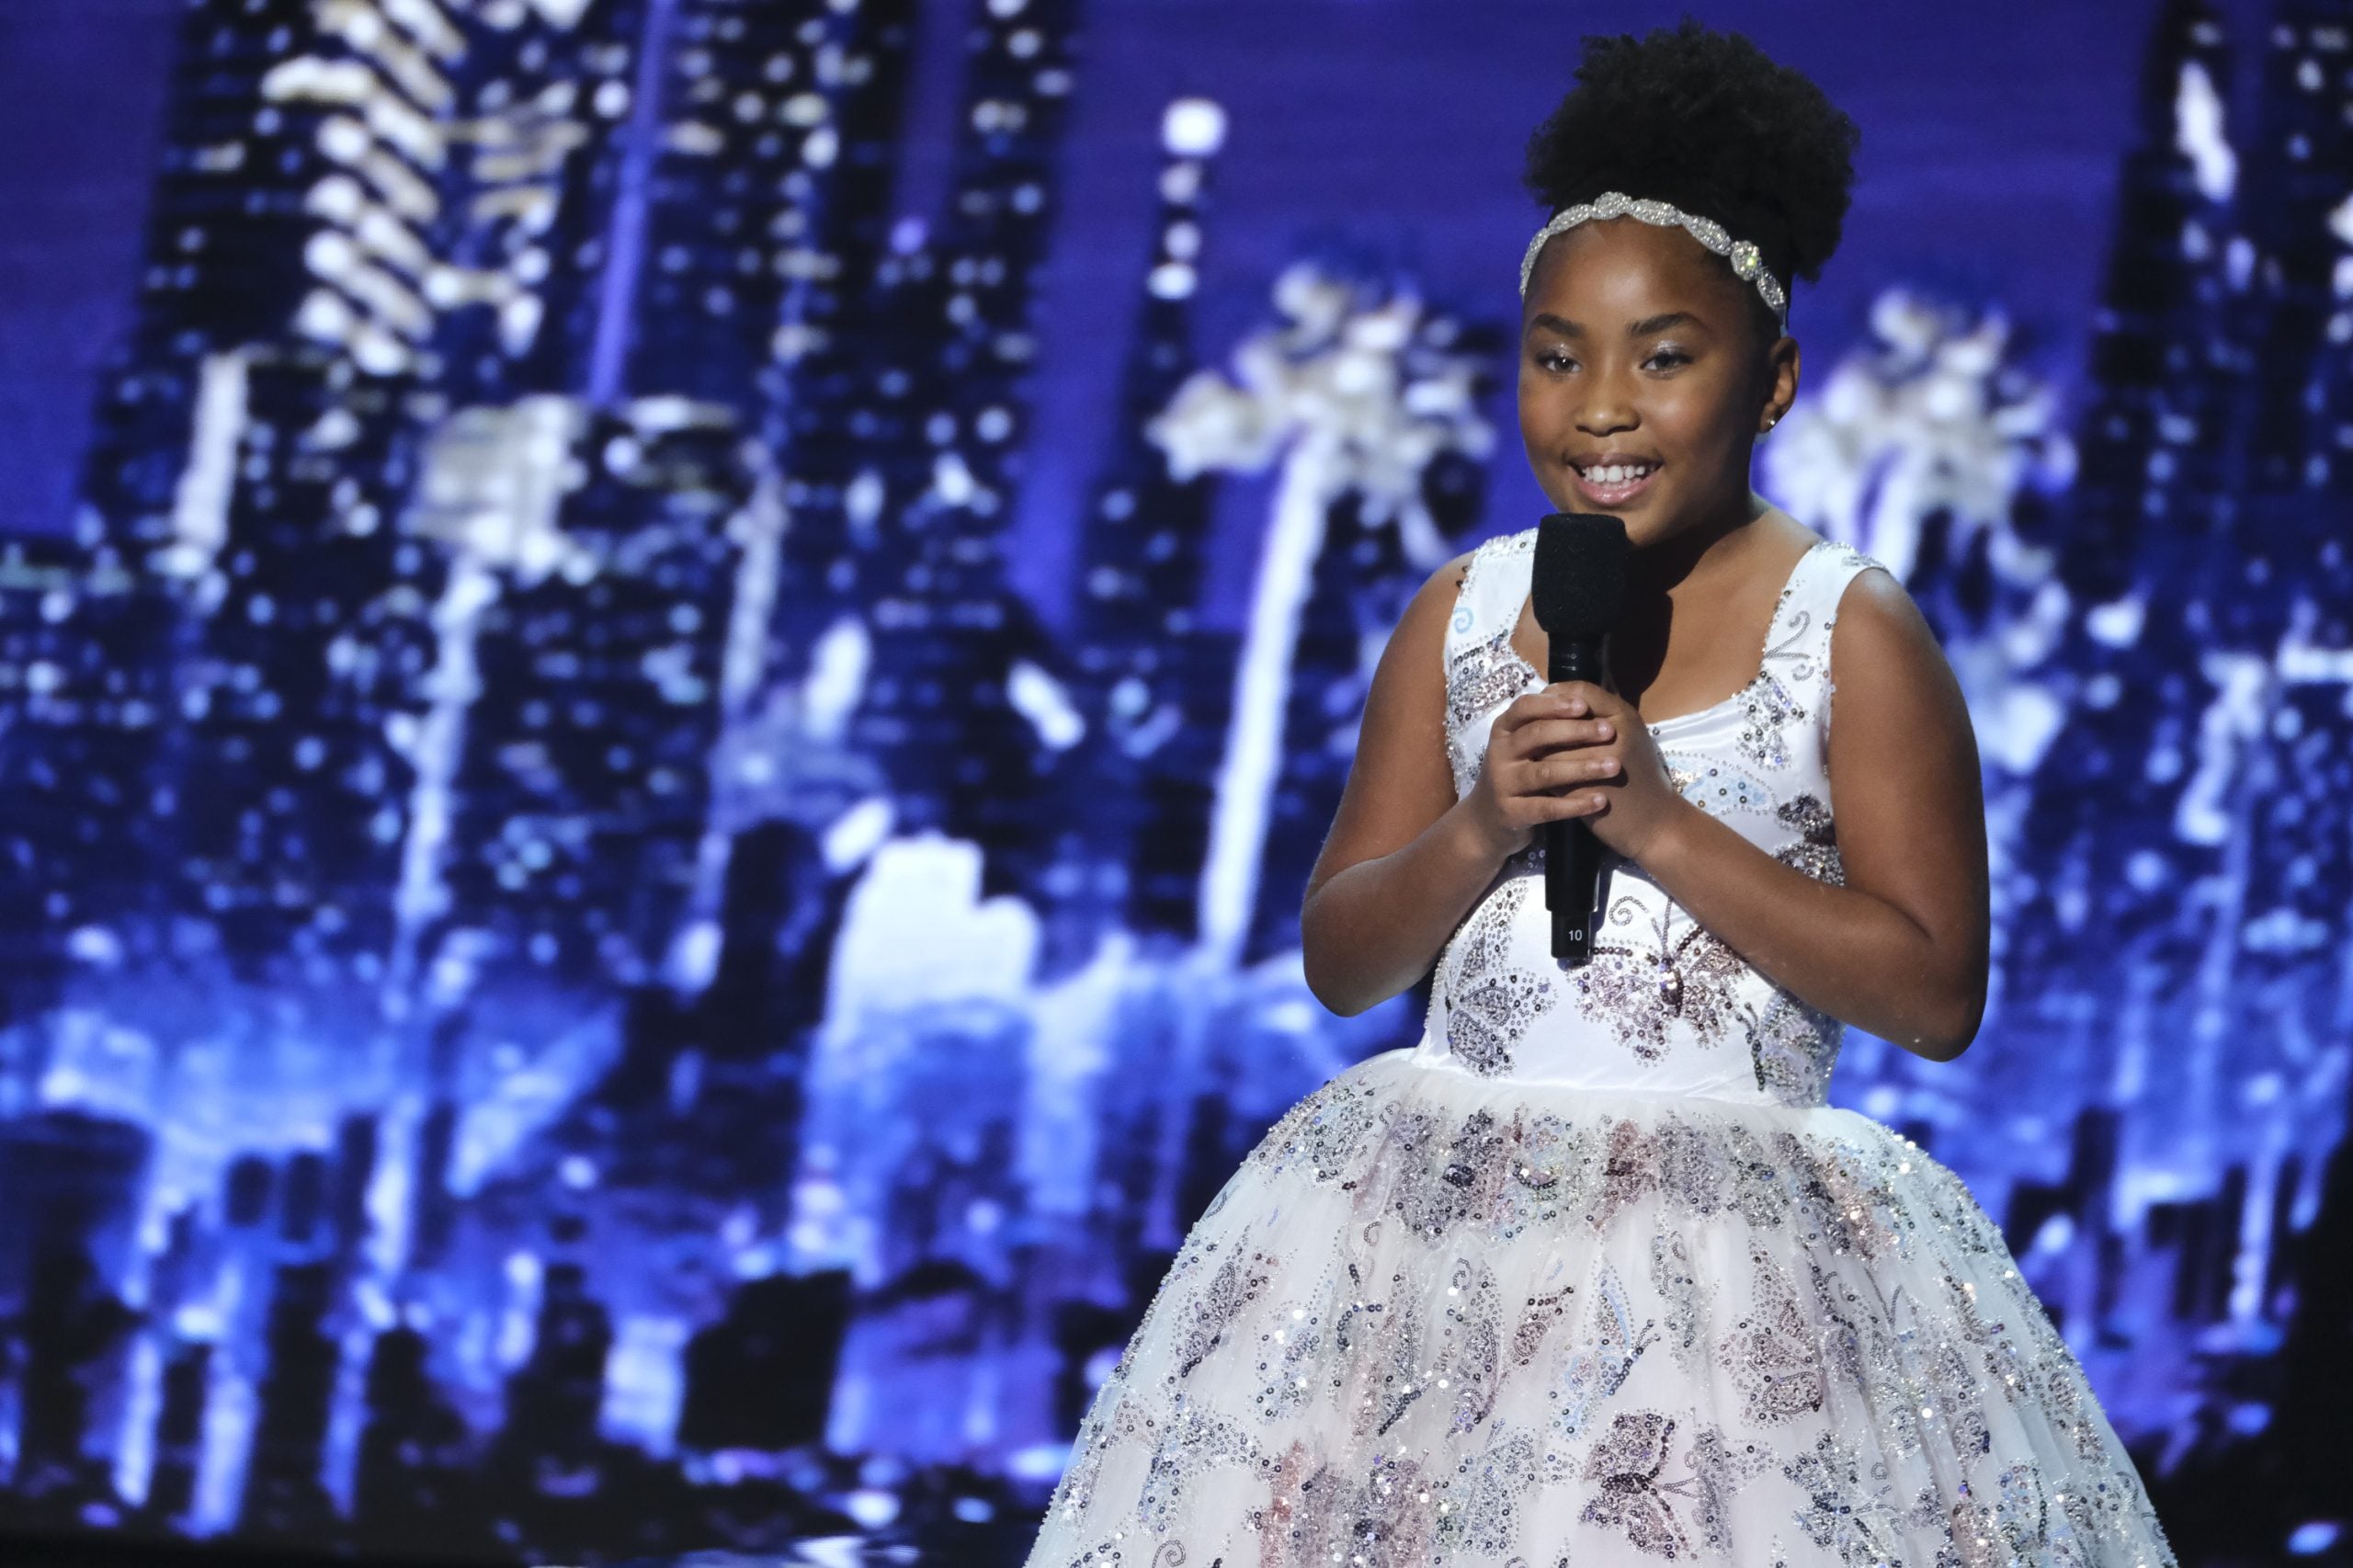 The World’s Youngest Opera Singer, Performs At New York City’s Empire State Building